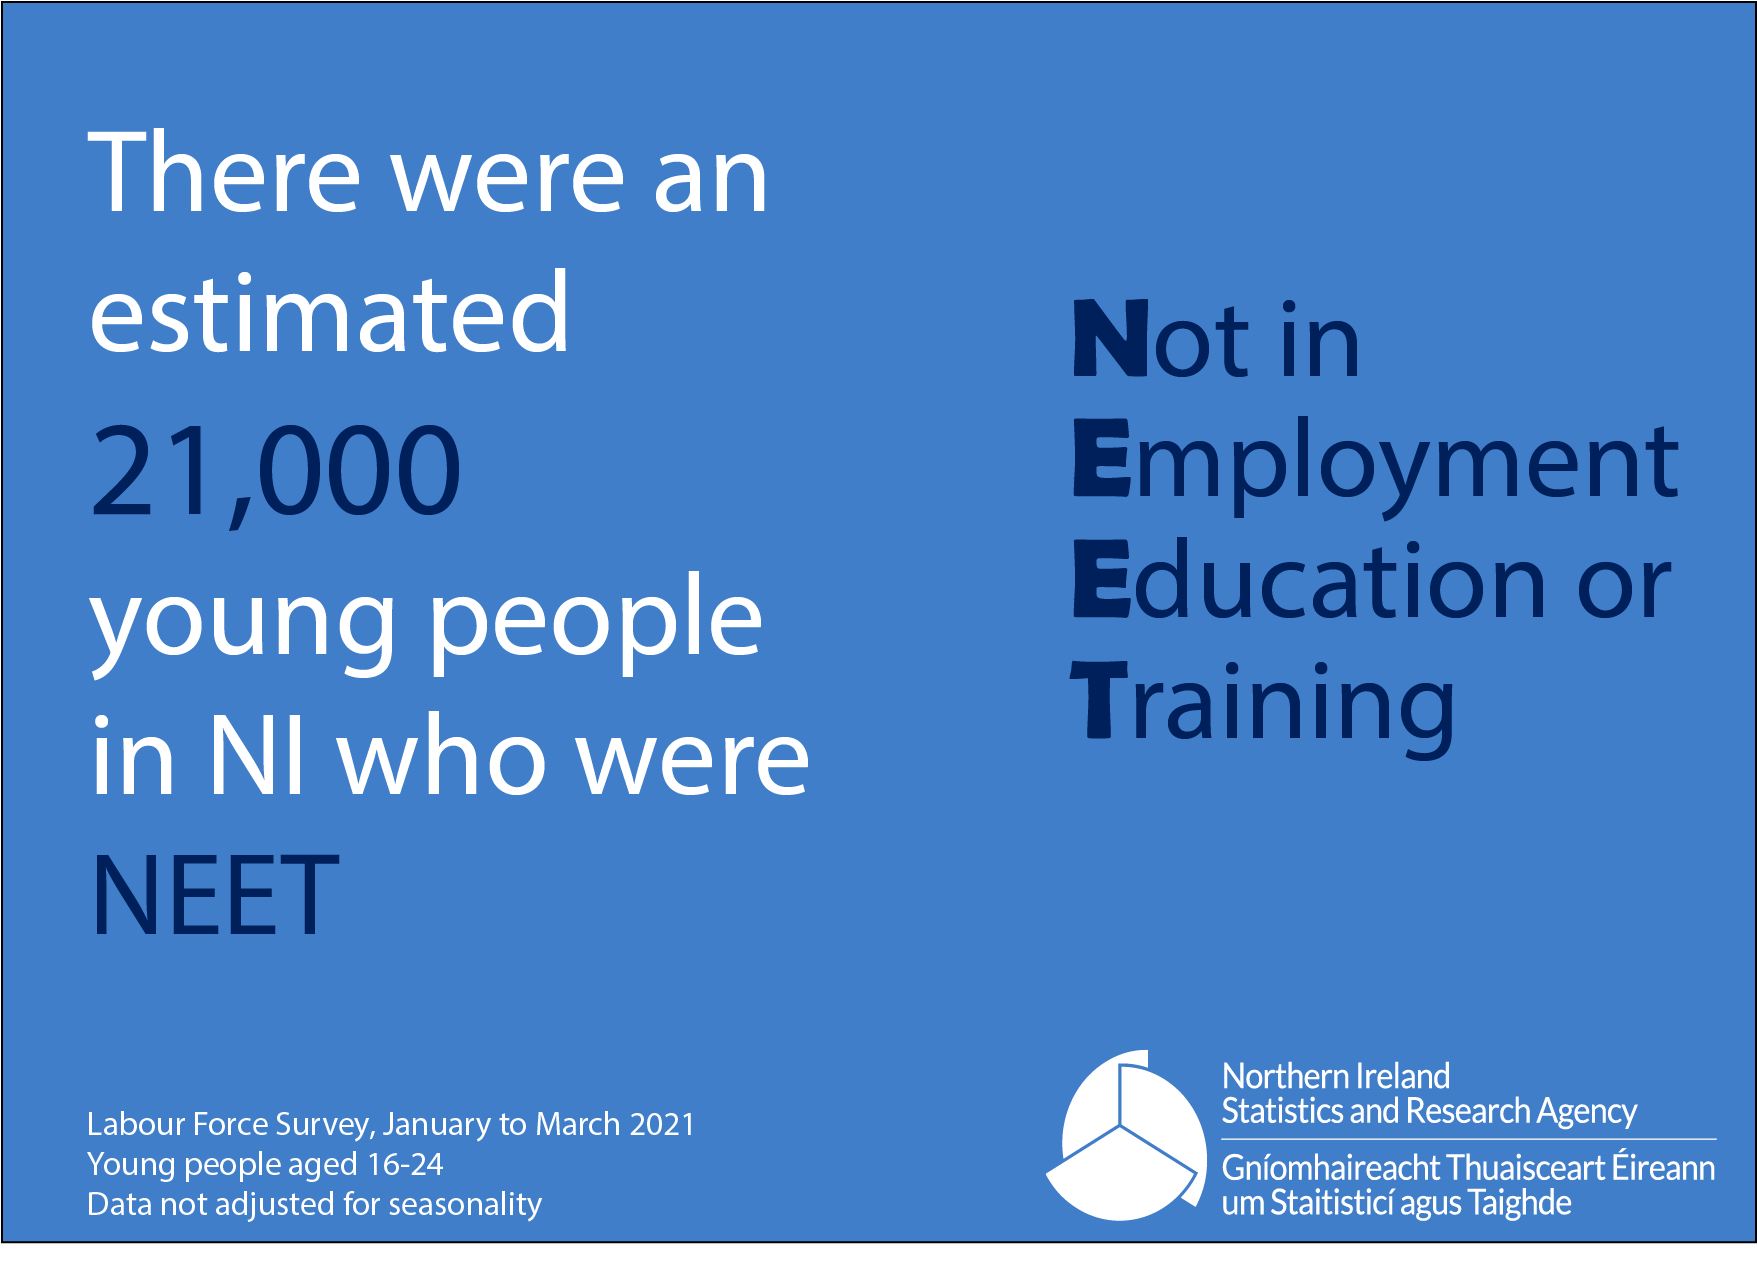 no education employment or training